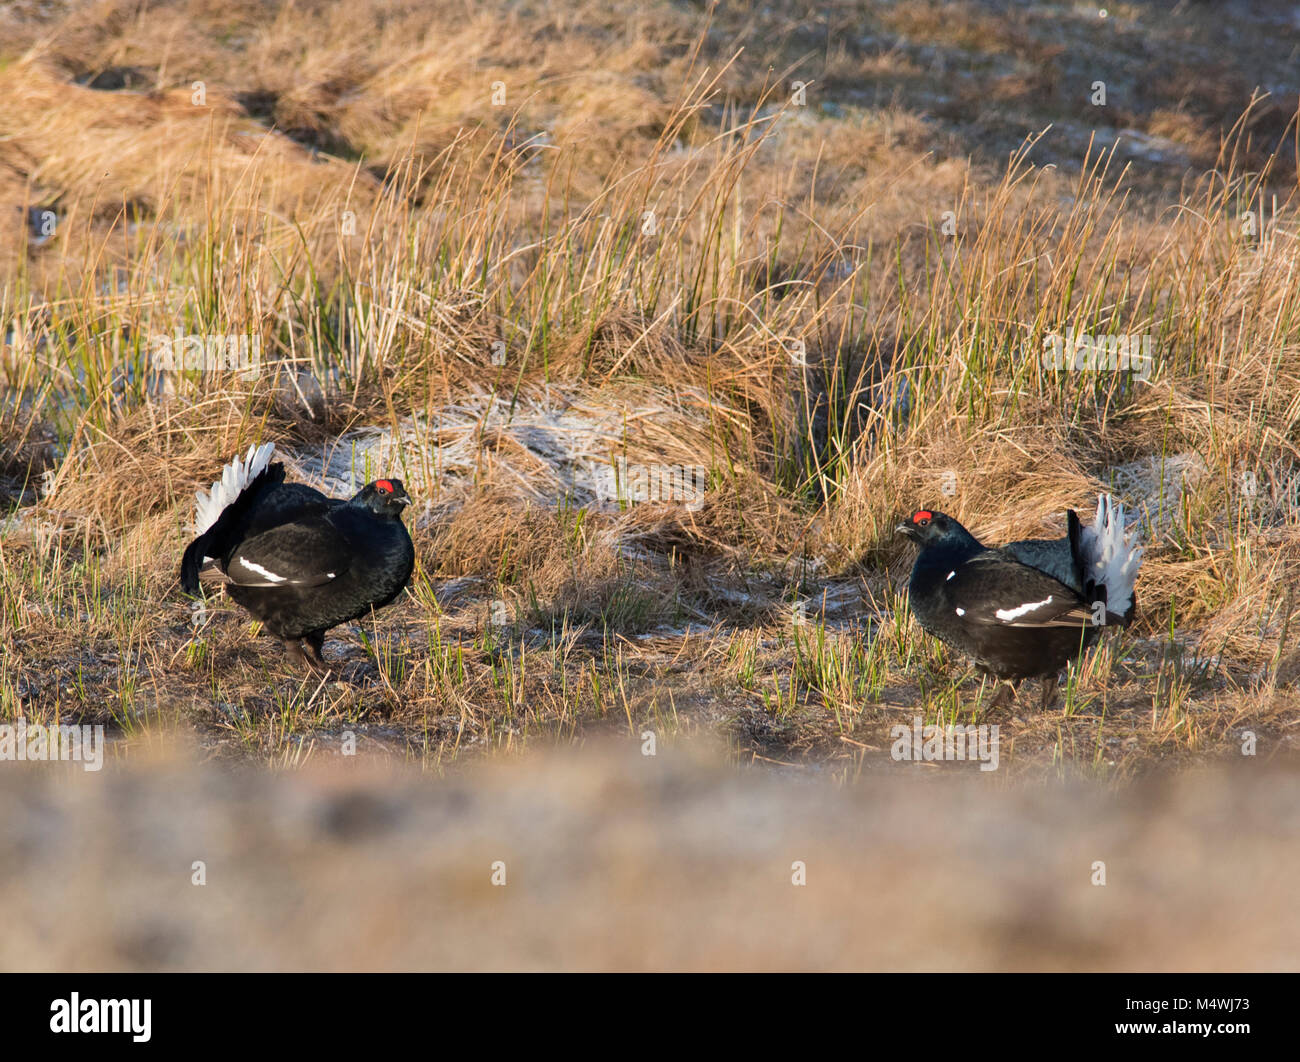 Male Black Grouse Lyrurus tetrix lekking at sunrise on a northern moorland in the UK with several blackcocks present. Stock Photo